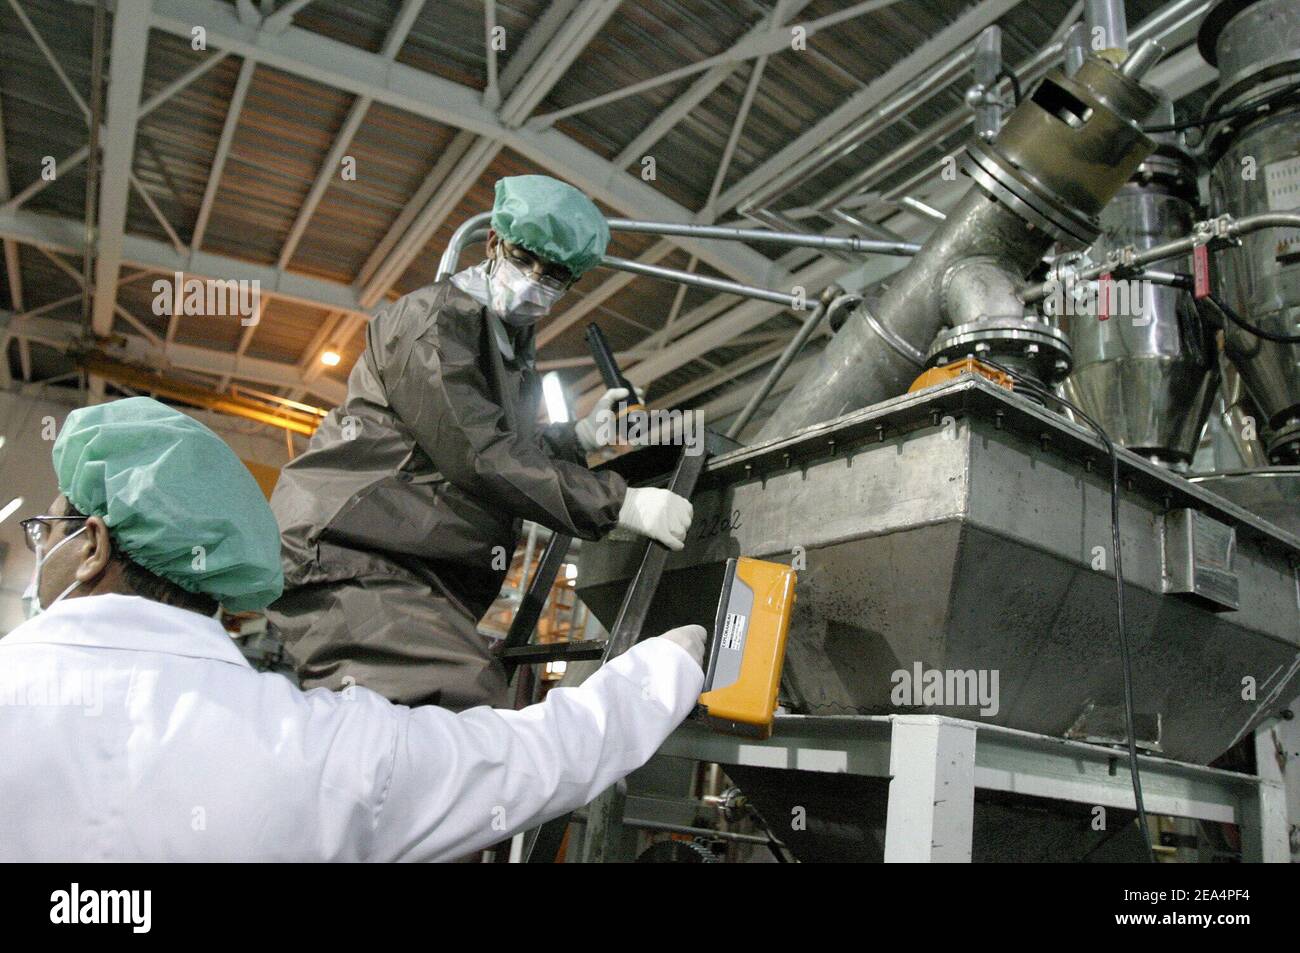 Iranian technicians work in the Uranium Conversion Facility (UCF) in Isfahan, Iran, on November 20, 2004. Iran said nuclear processing is set to resume at the Isfahan plant, the largest of its type in the country, on Wednesday. France, Britain and Germany have warned Iran of a major international crisis if the country goes ahead with its plans. Photo by ABACAPRESS.COM Stock Photo